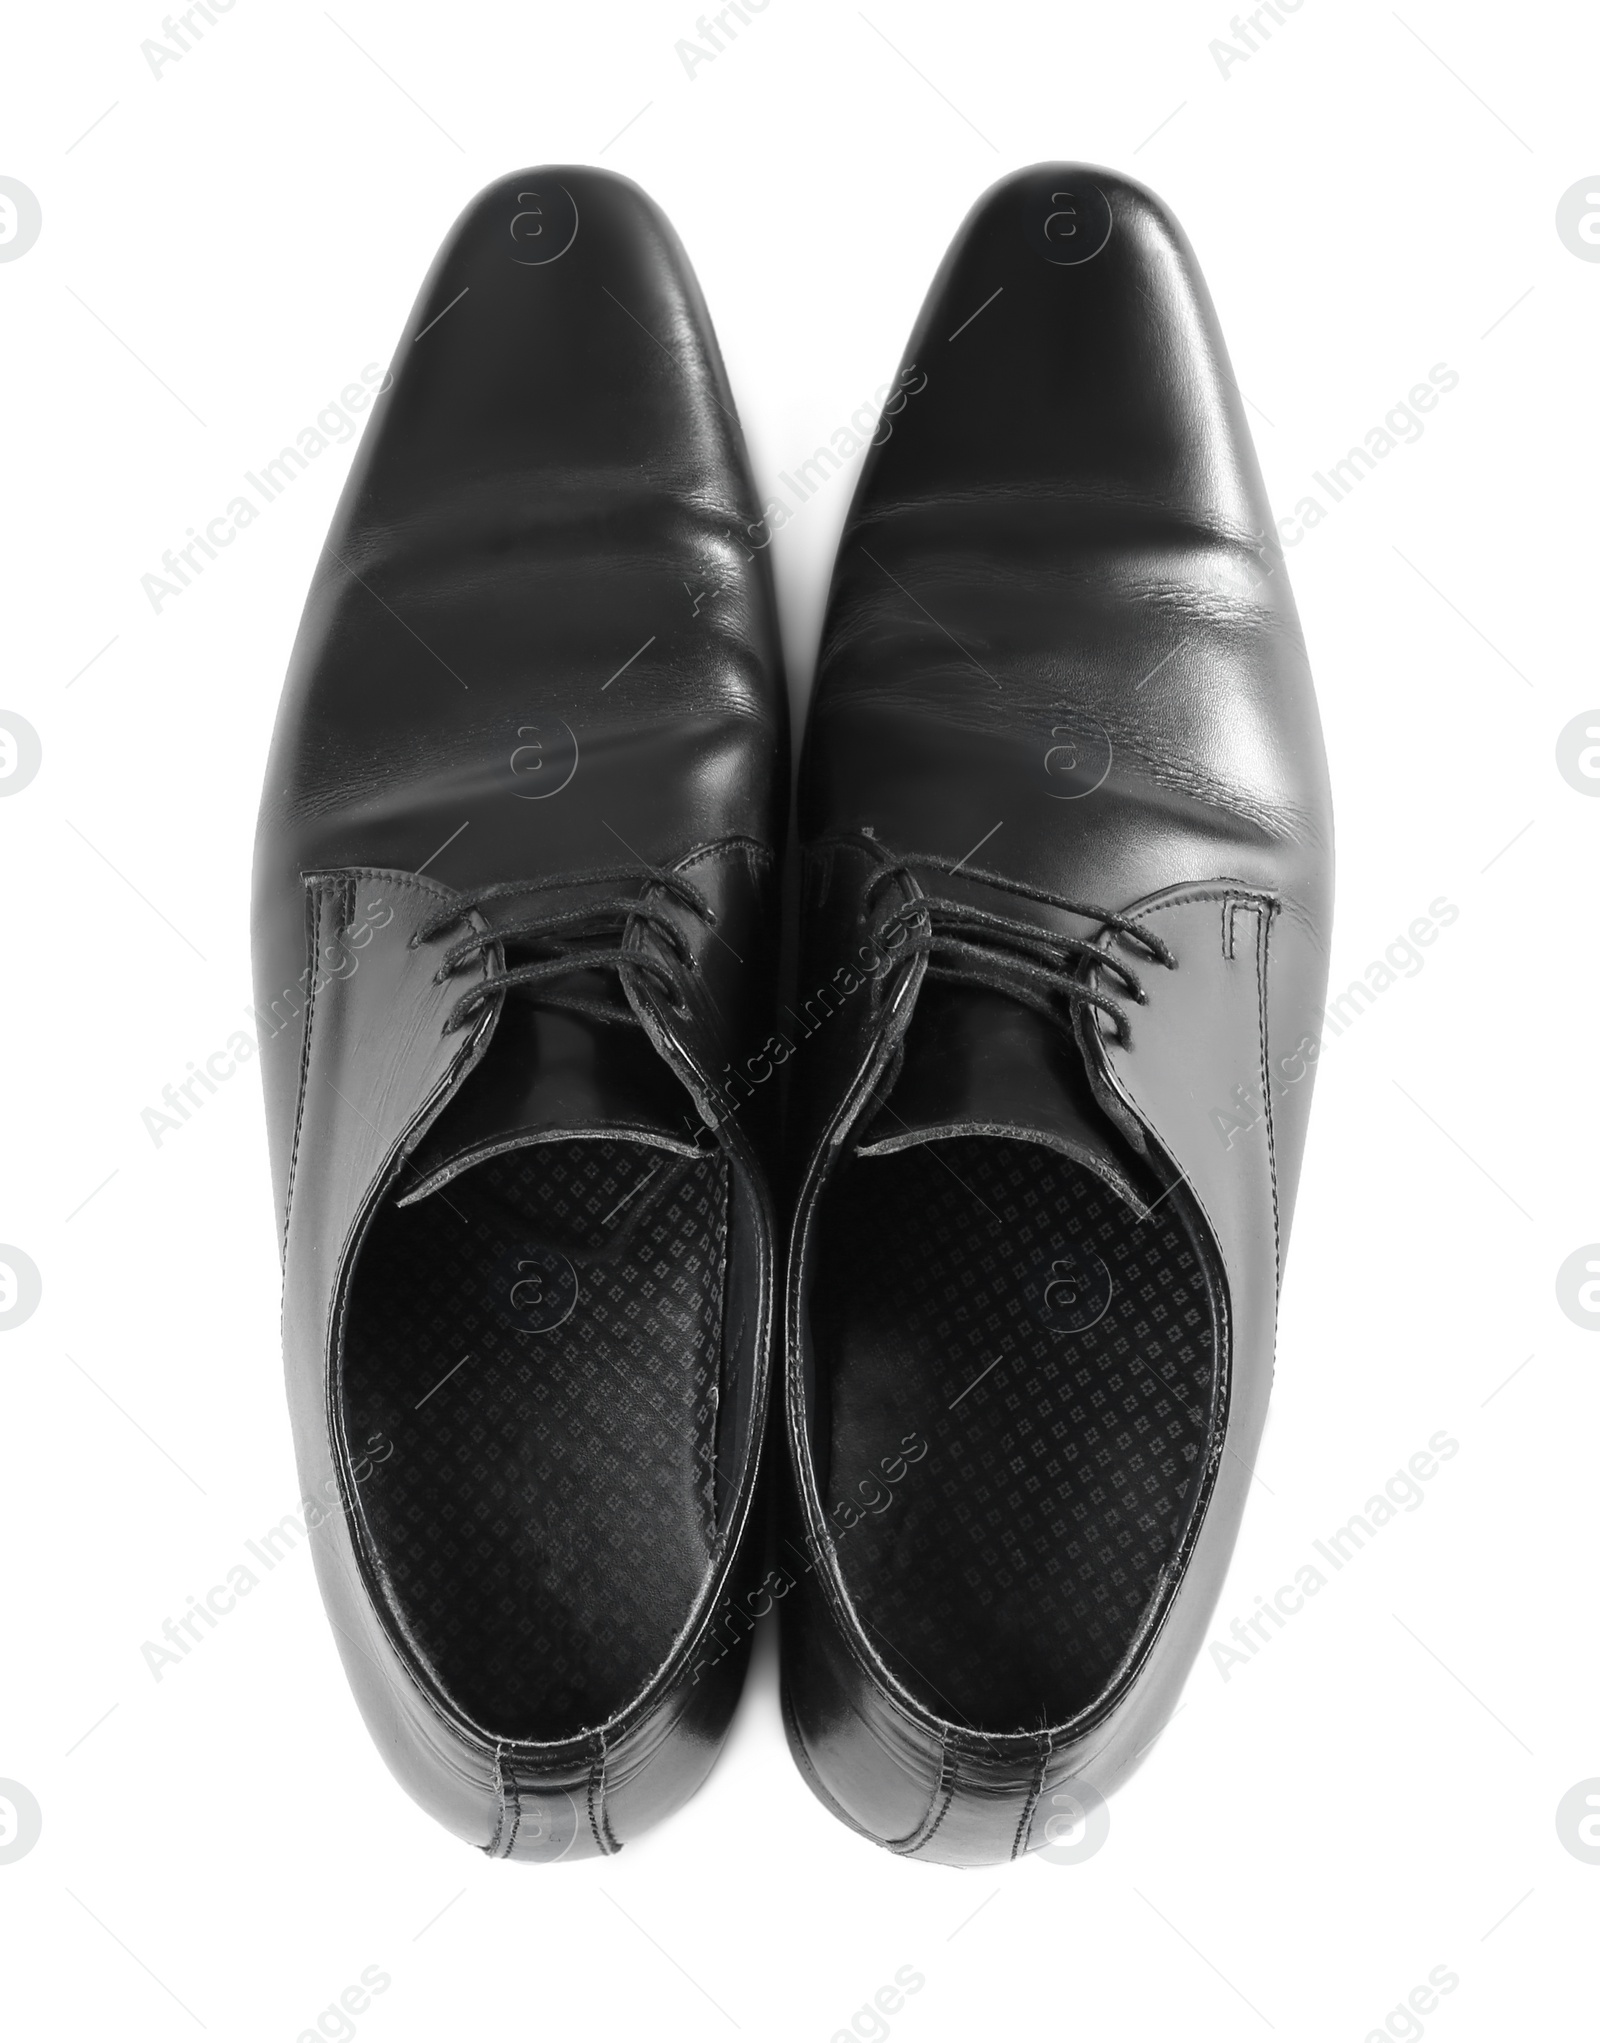 Photo of Pair of stylish leather shoes isolated on white, top view